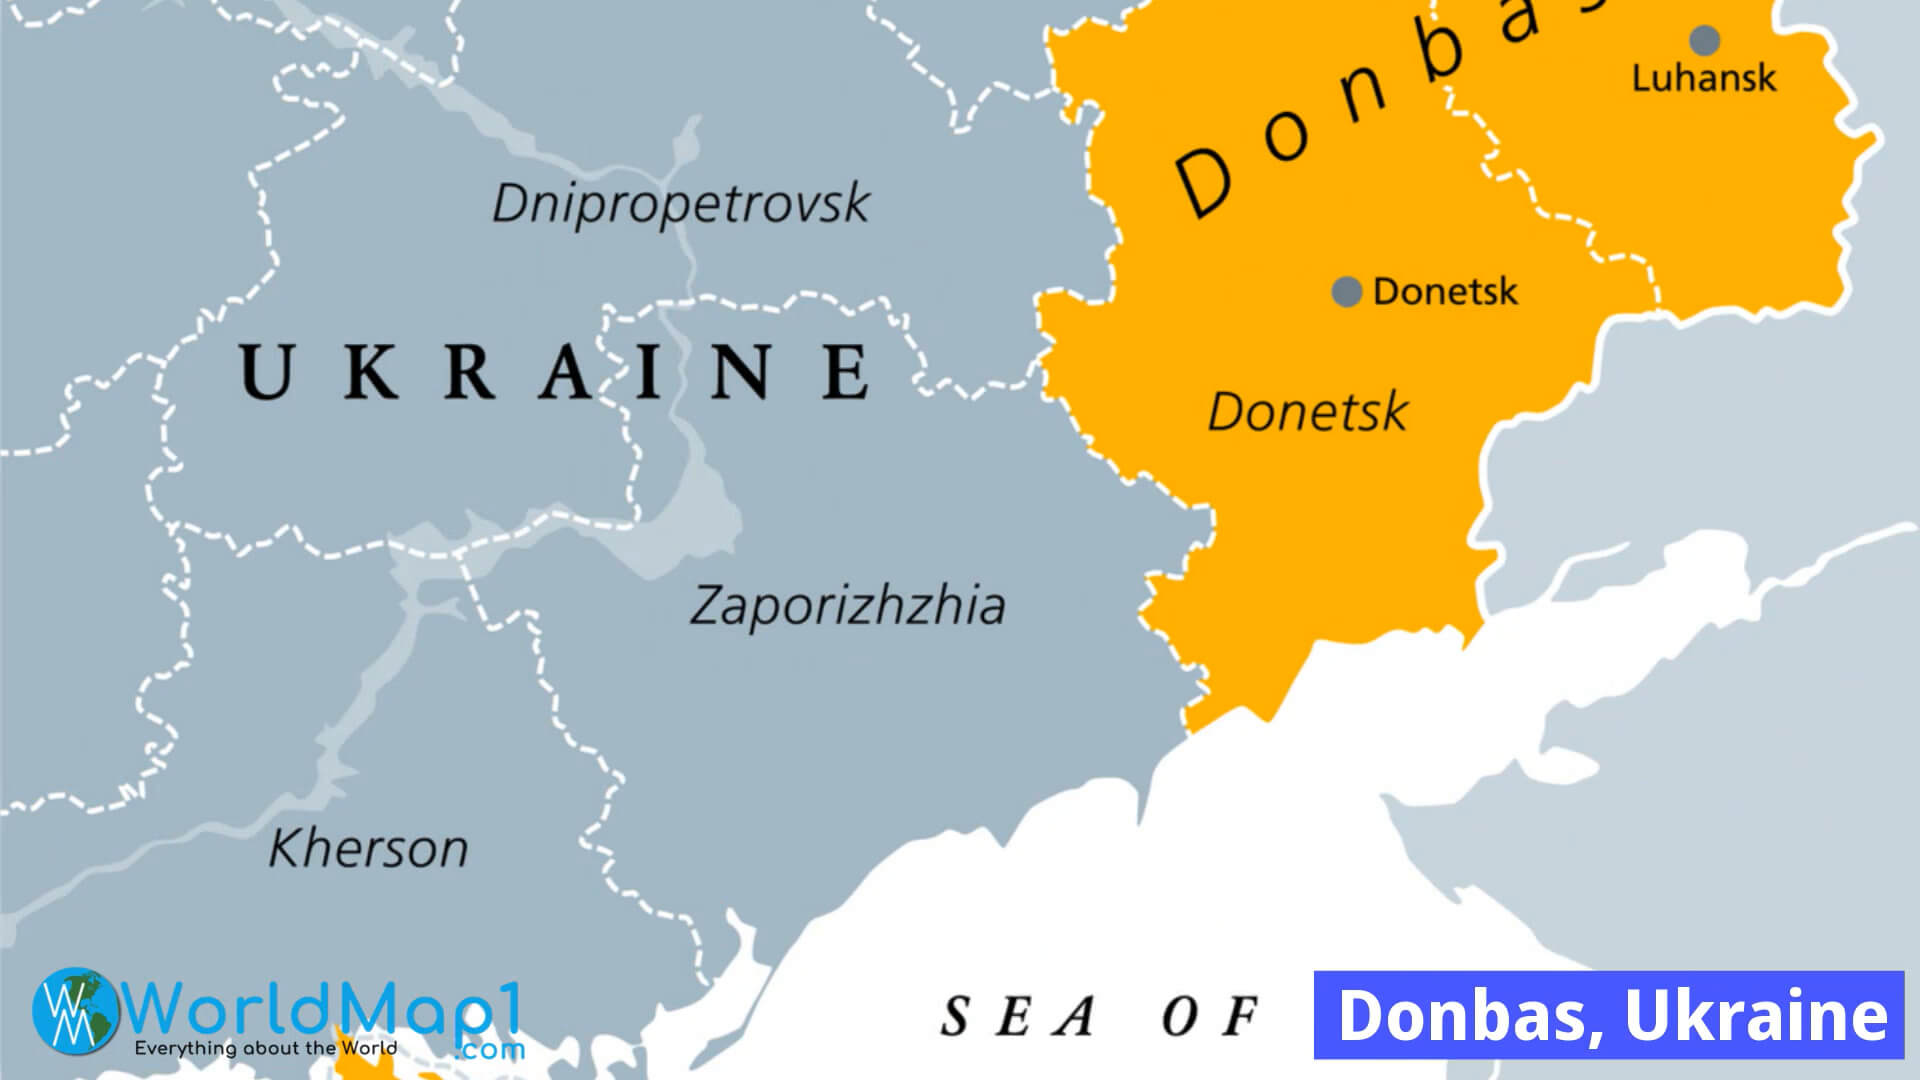 Donetsk and Luhansk Map in Donbas